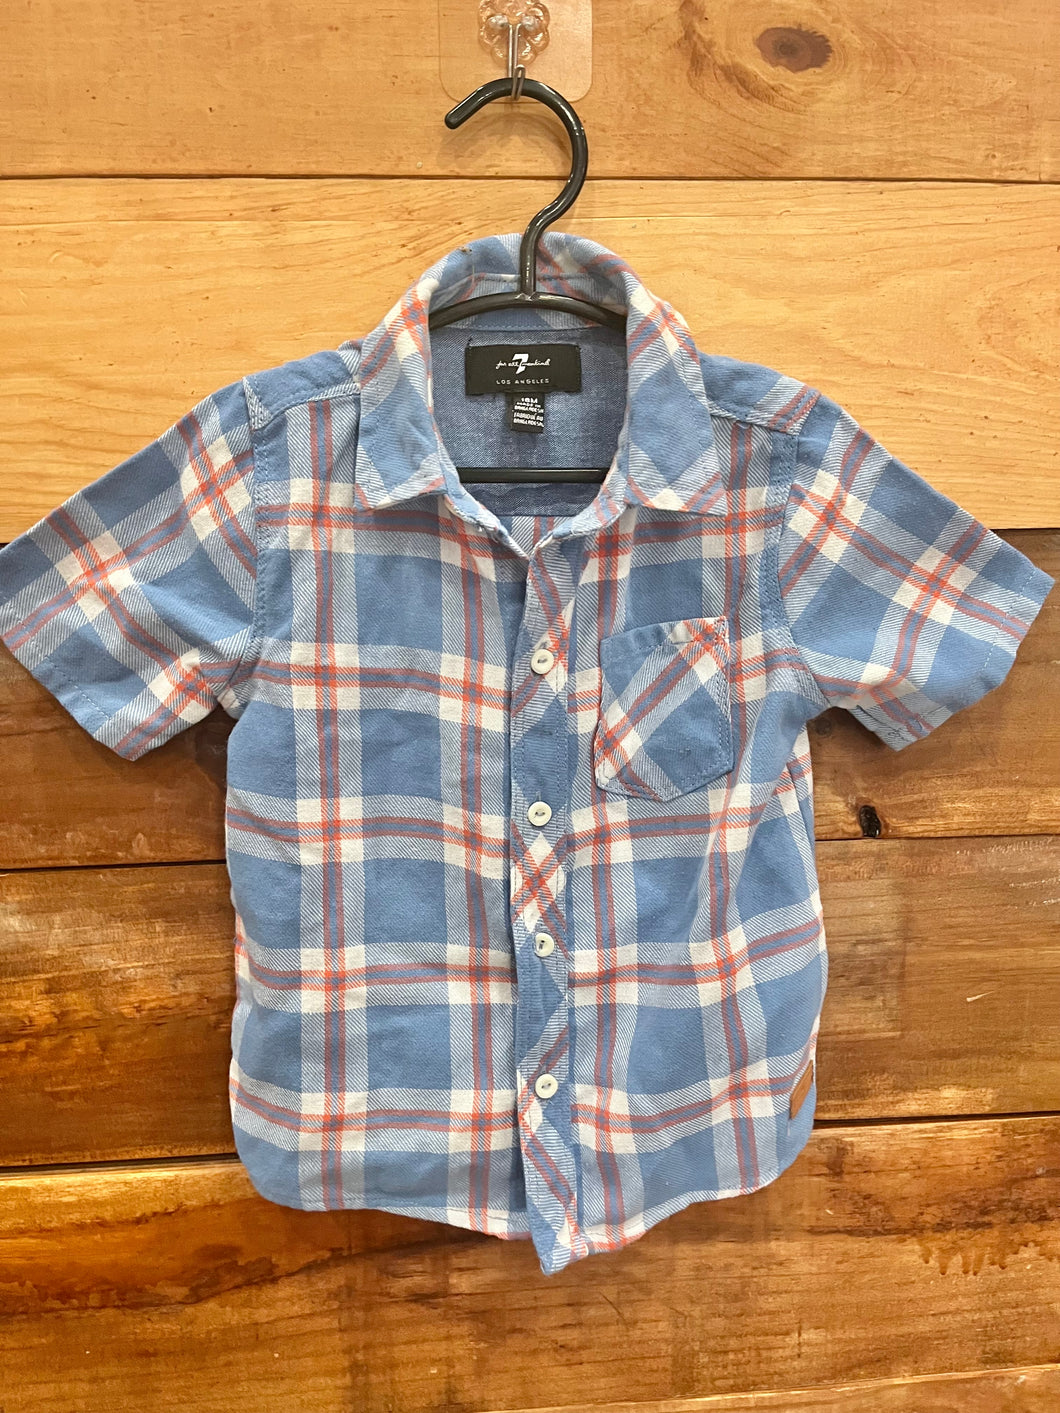 7 For All Mankind Blue Plaid Shirt Size 18m